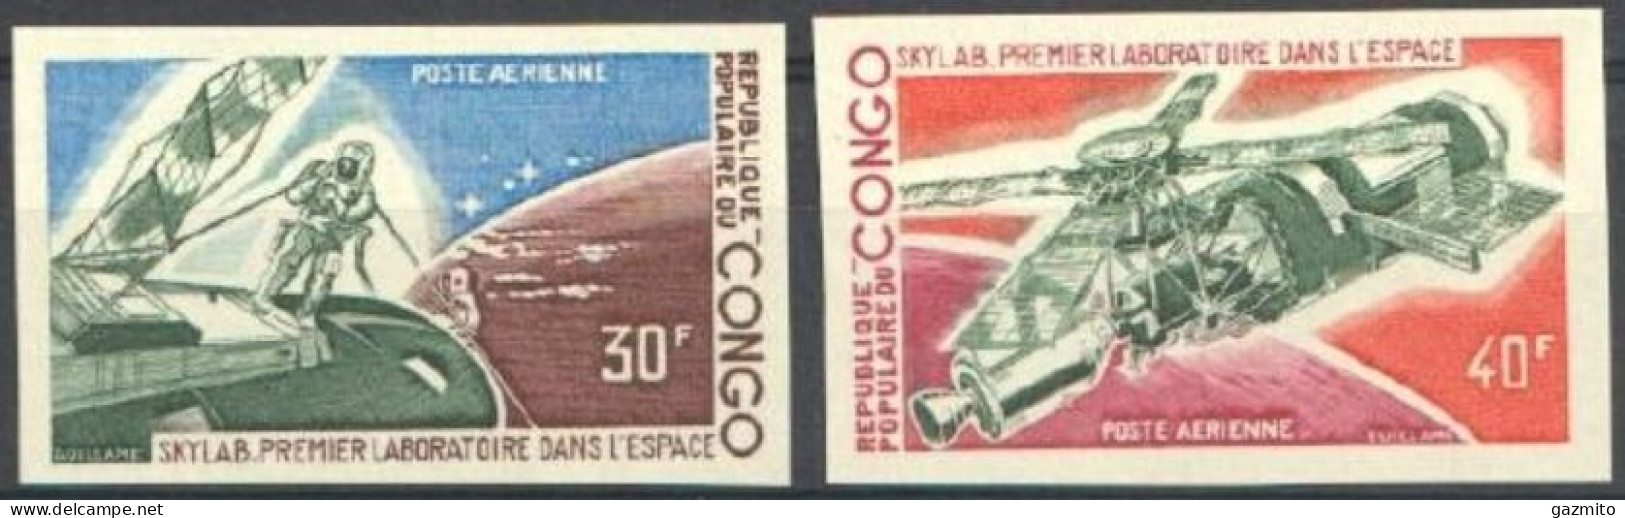 Congo Brazaville 1973, Airmail - Skylab Space Laboratory, 2val IMPERFORATED - Afrika